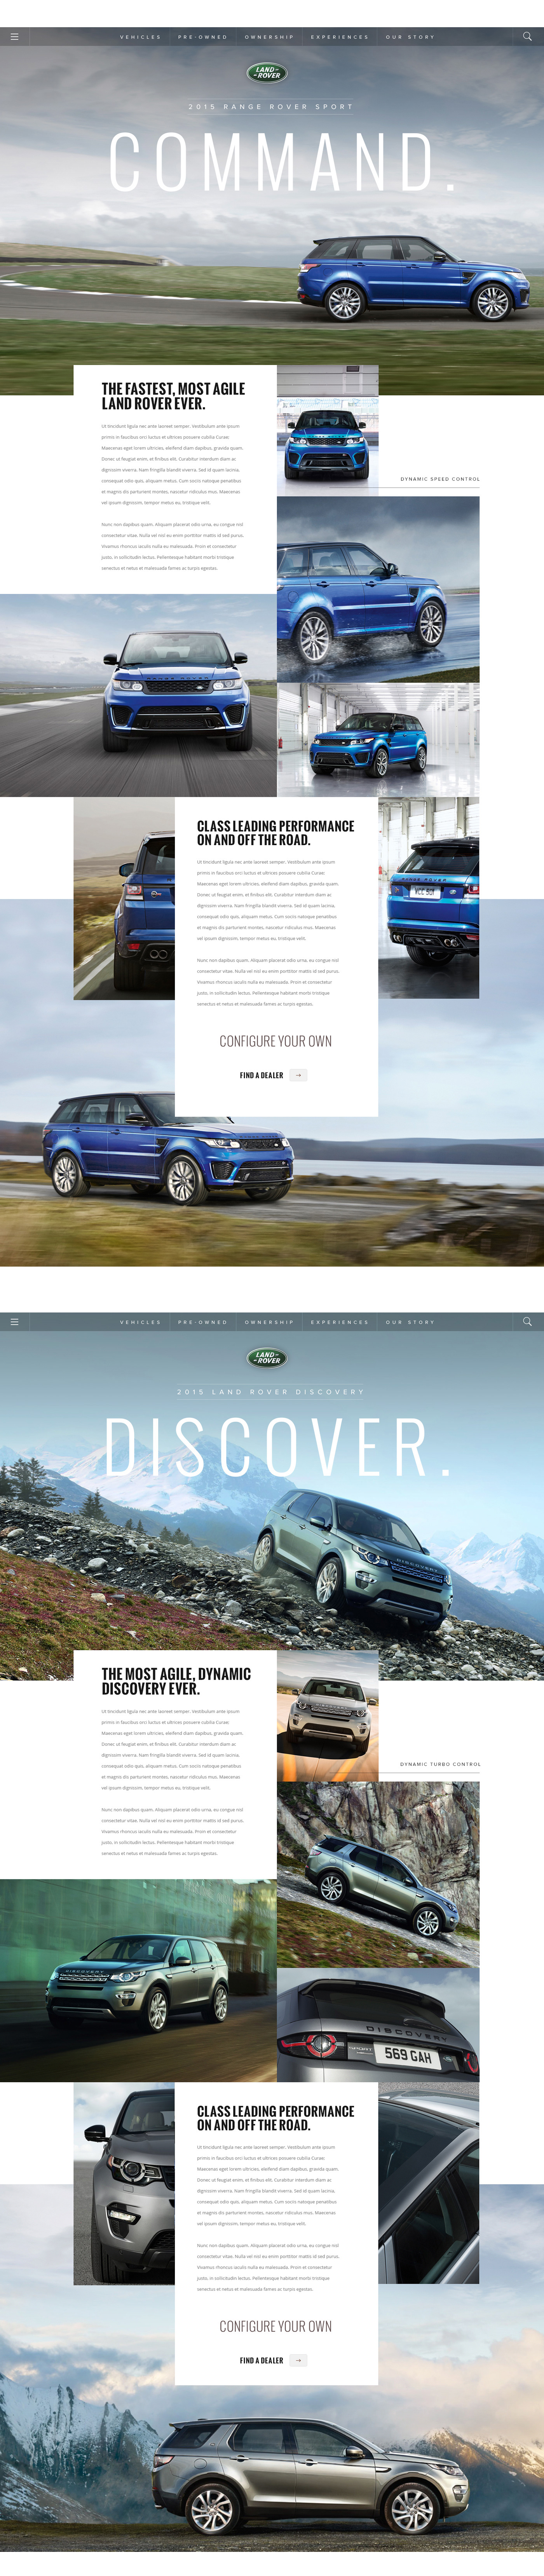 Land Rover range rover discovery Ford automotive   interactive